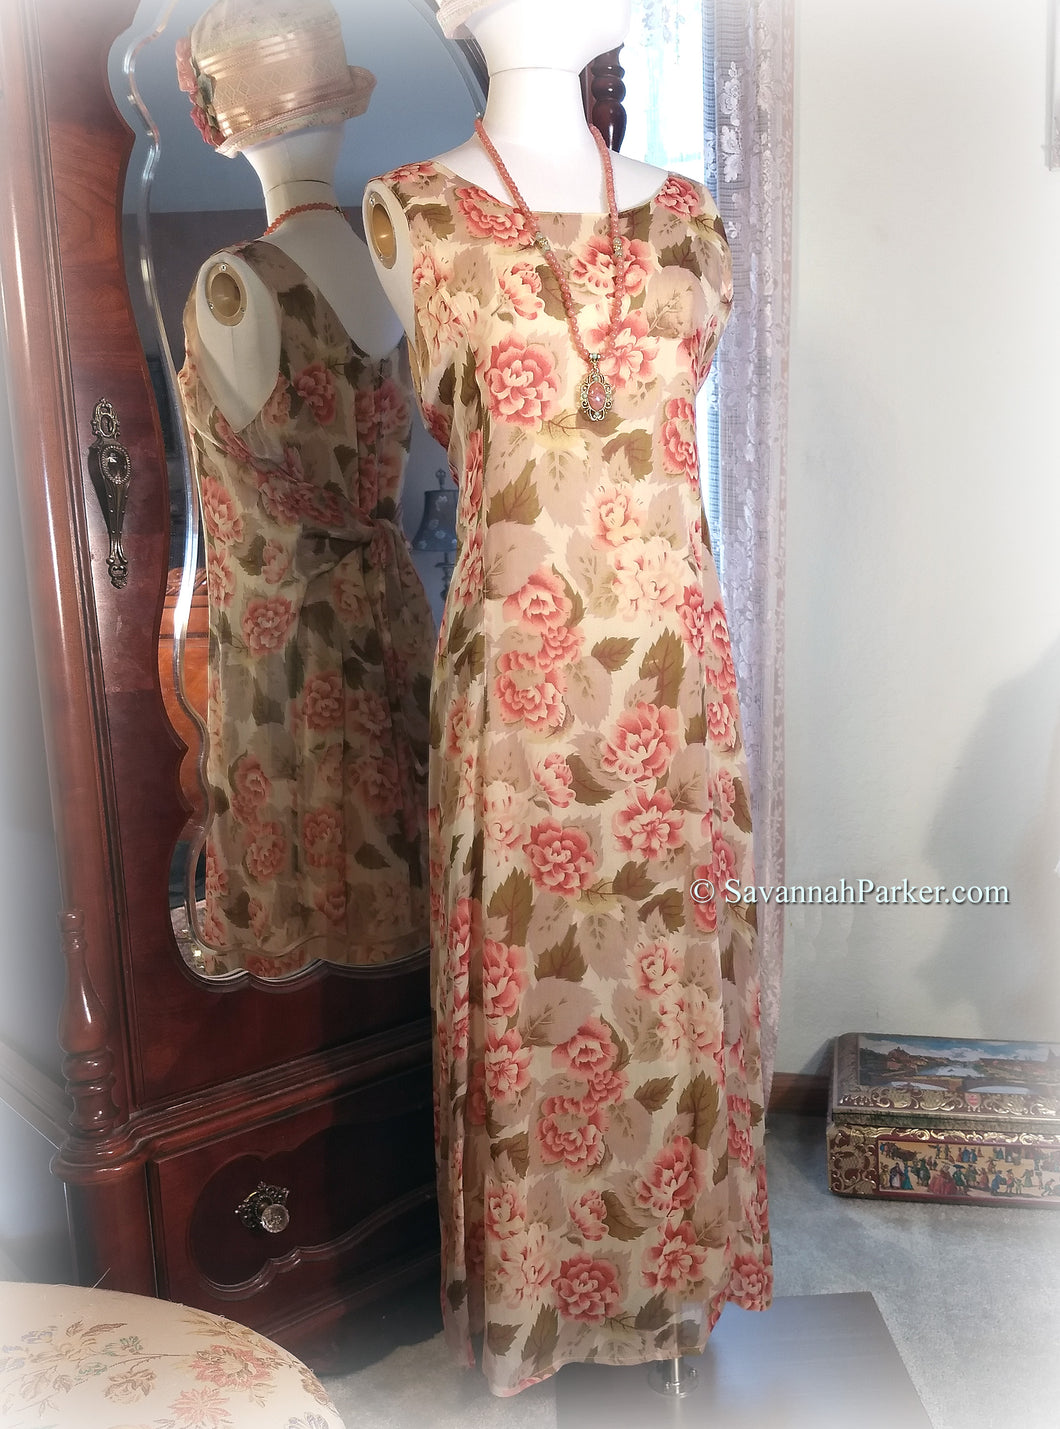 SOLD April Cornell Vintage 1990s Does 1920s/30s Dress / Floral Sheer Coral Roses Rayon Chiffon / Fully Lined / Tie Back Sash / Like New Size M